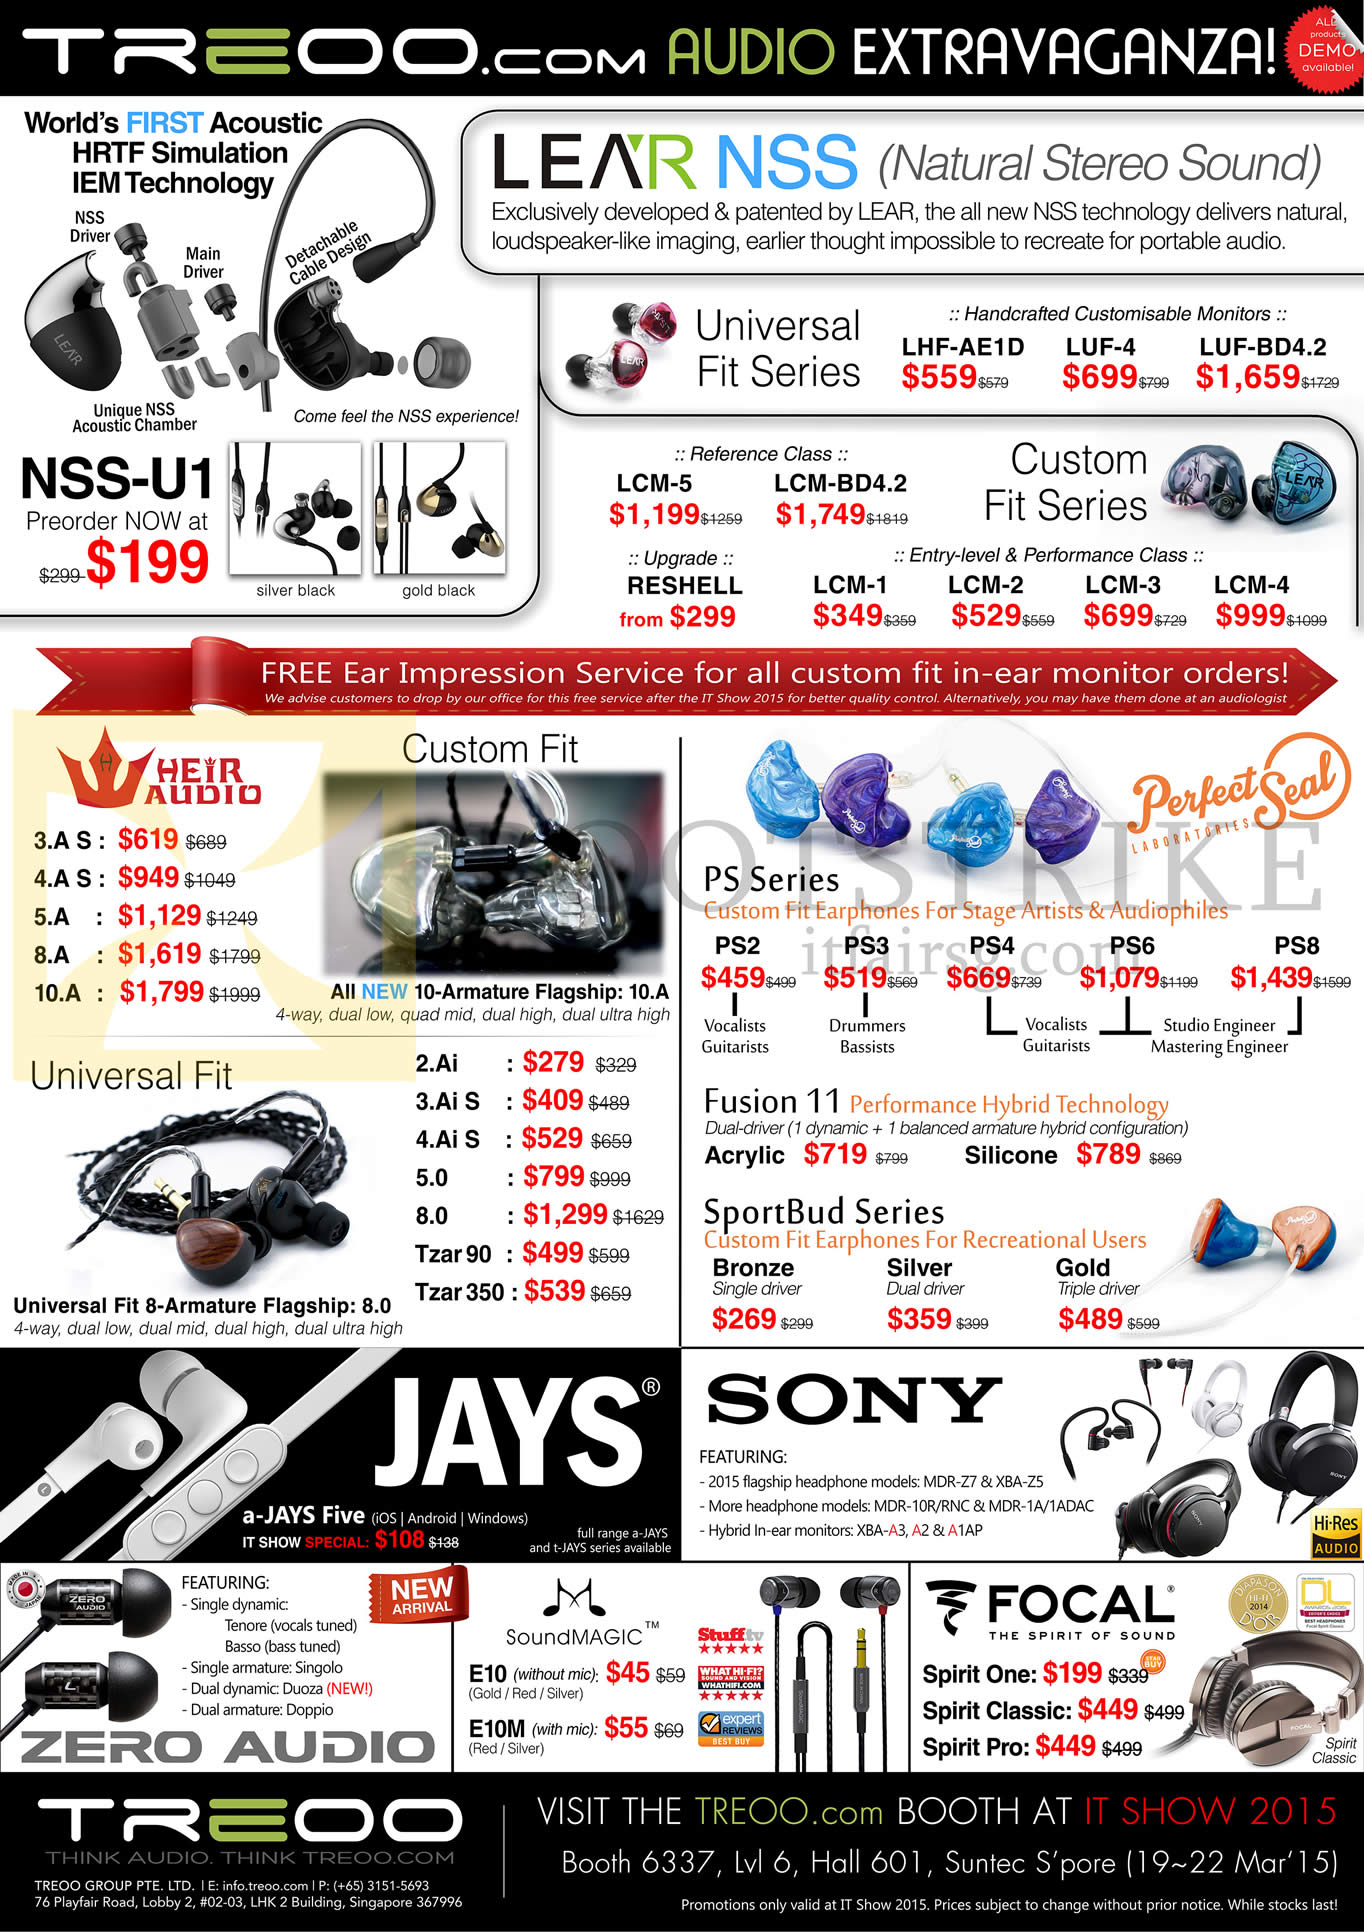 IT SHOW 2015 price list image brochure of Red Fusion Treoo Earphones NSS-U1, Lear Nss LHF-AE1D, LUF-4, BD4.2, LCM-5, BD4.2, Perfect Seal PS2, Fusion 11, Focal Spirit One, Classic, Pro, Sound Magic E10, E10M, A-Jays Five